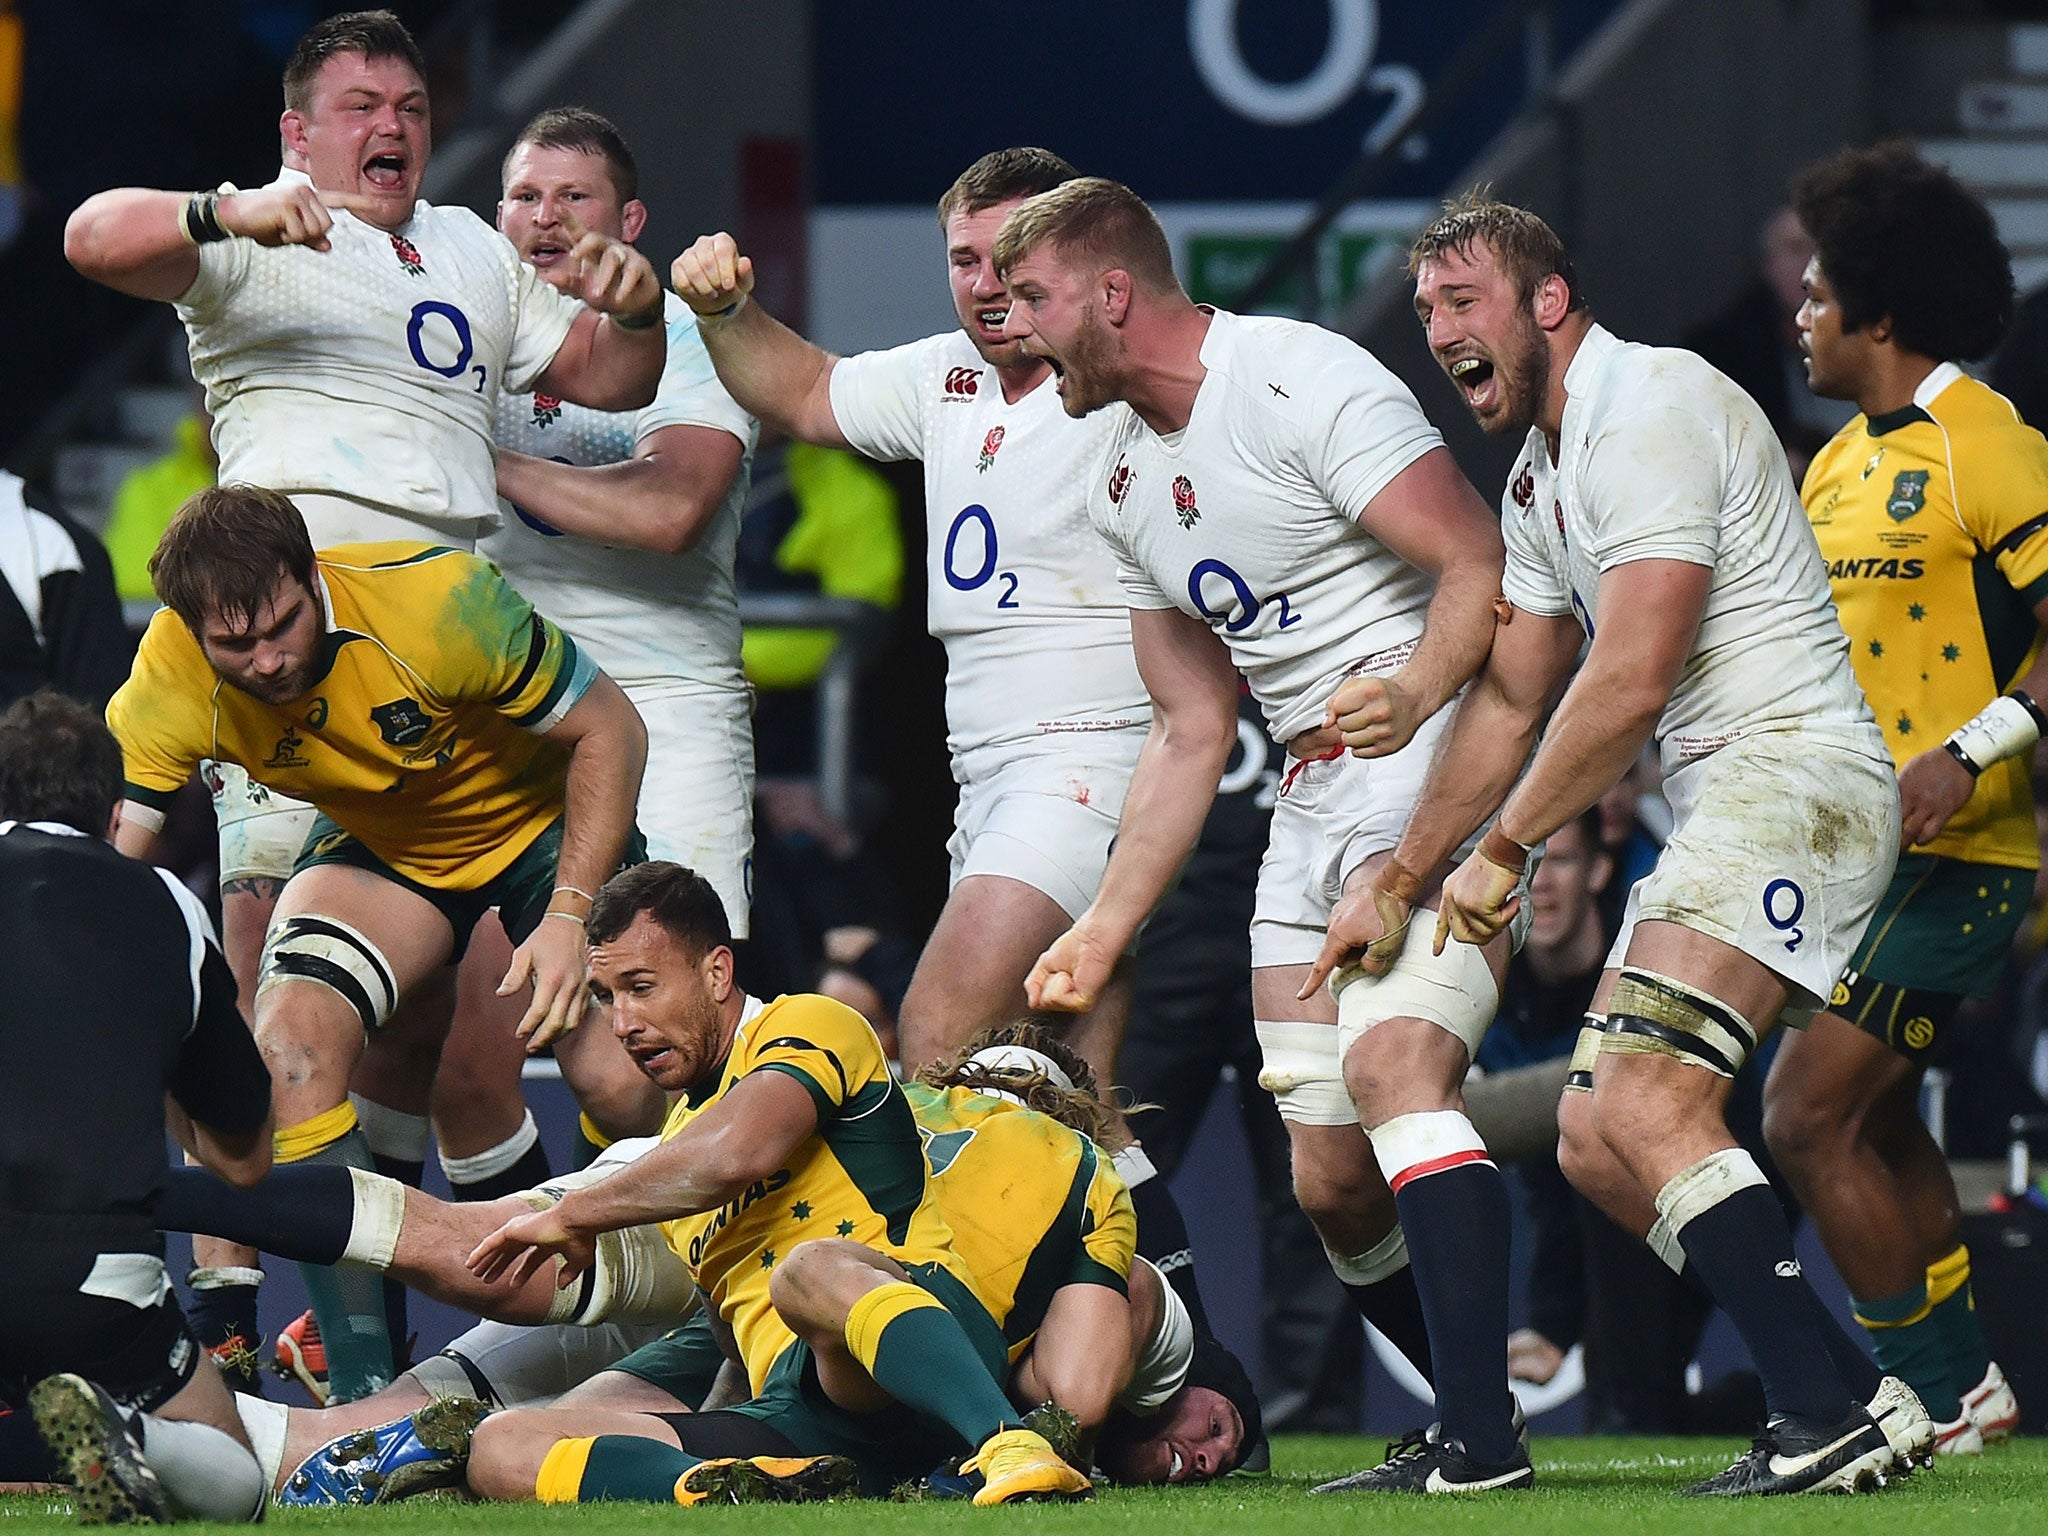 England vs Australia preview What time does it start, what channel is it on and where can I watch it? The Independent The Independent